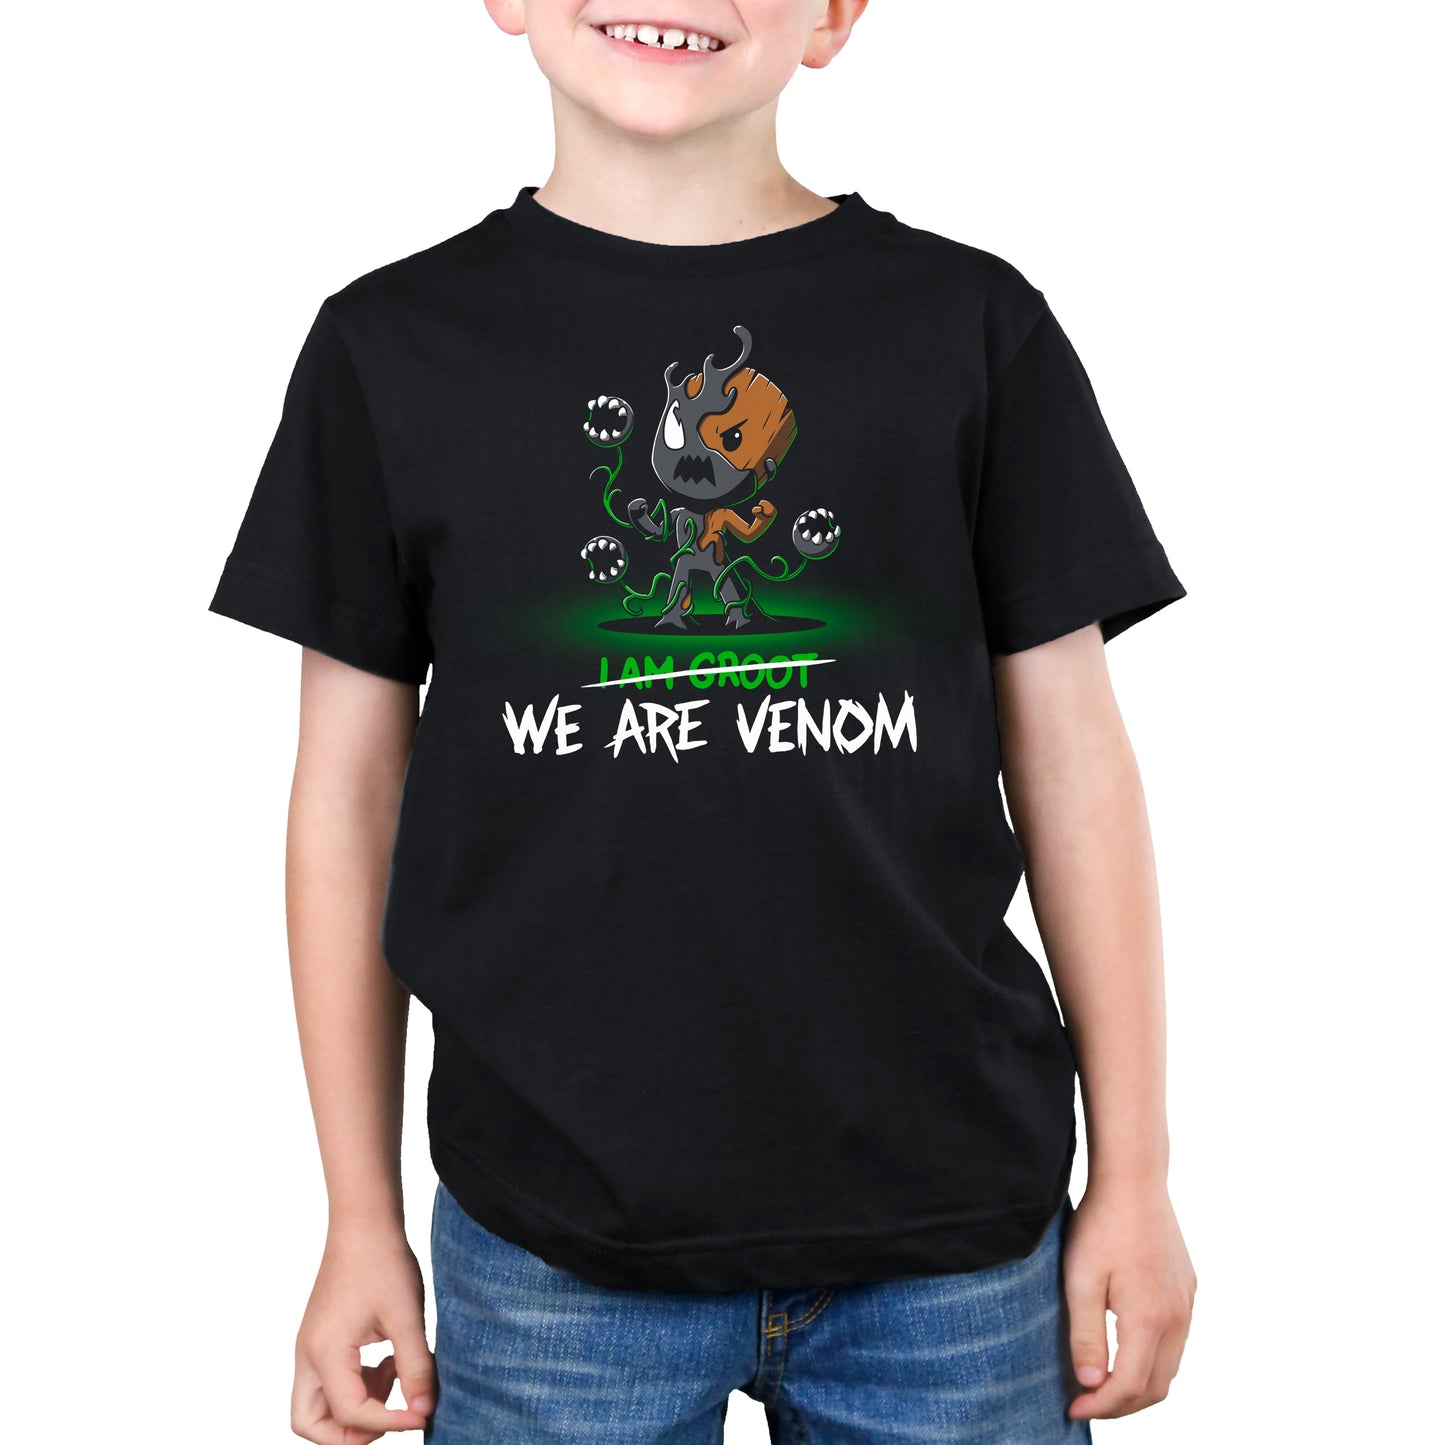 Licensed Venomized Groot kids t-shirt by Marvel.